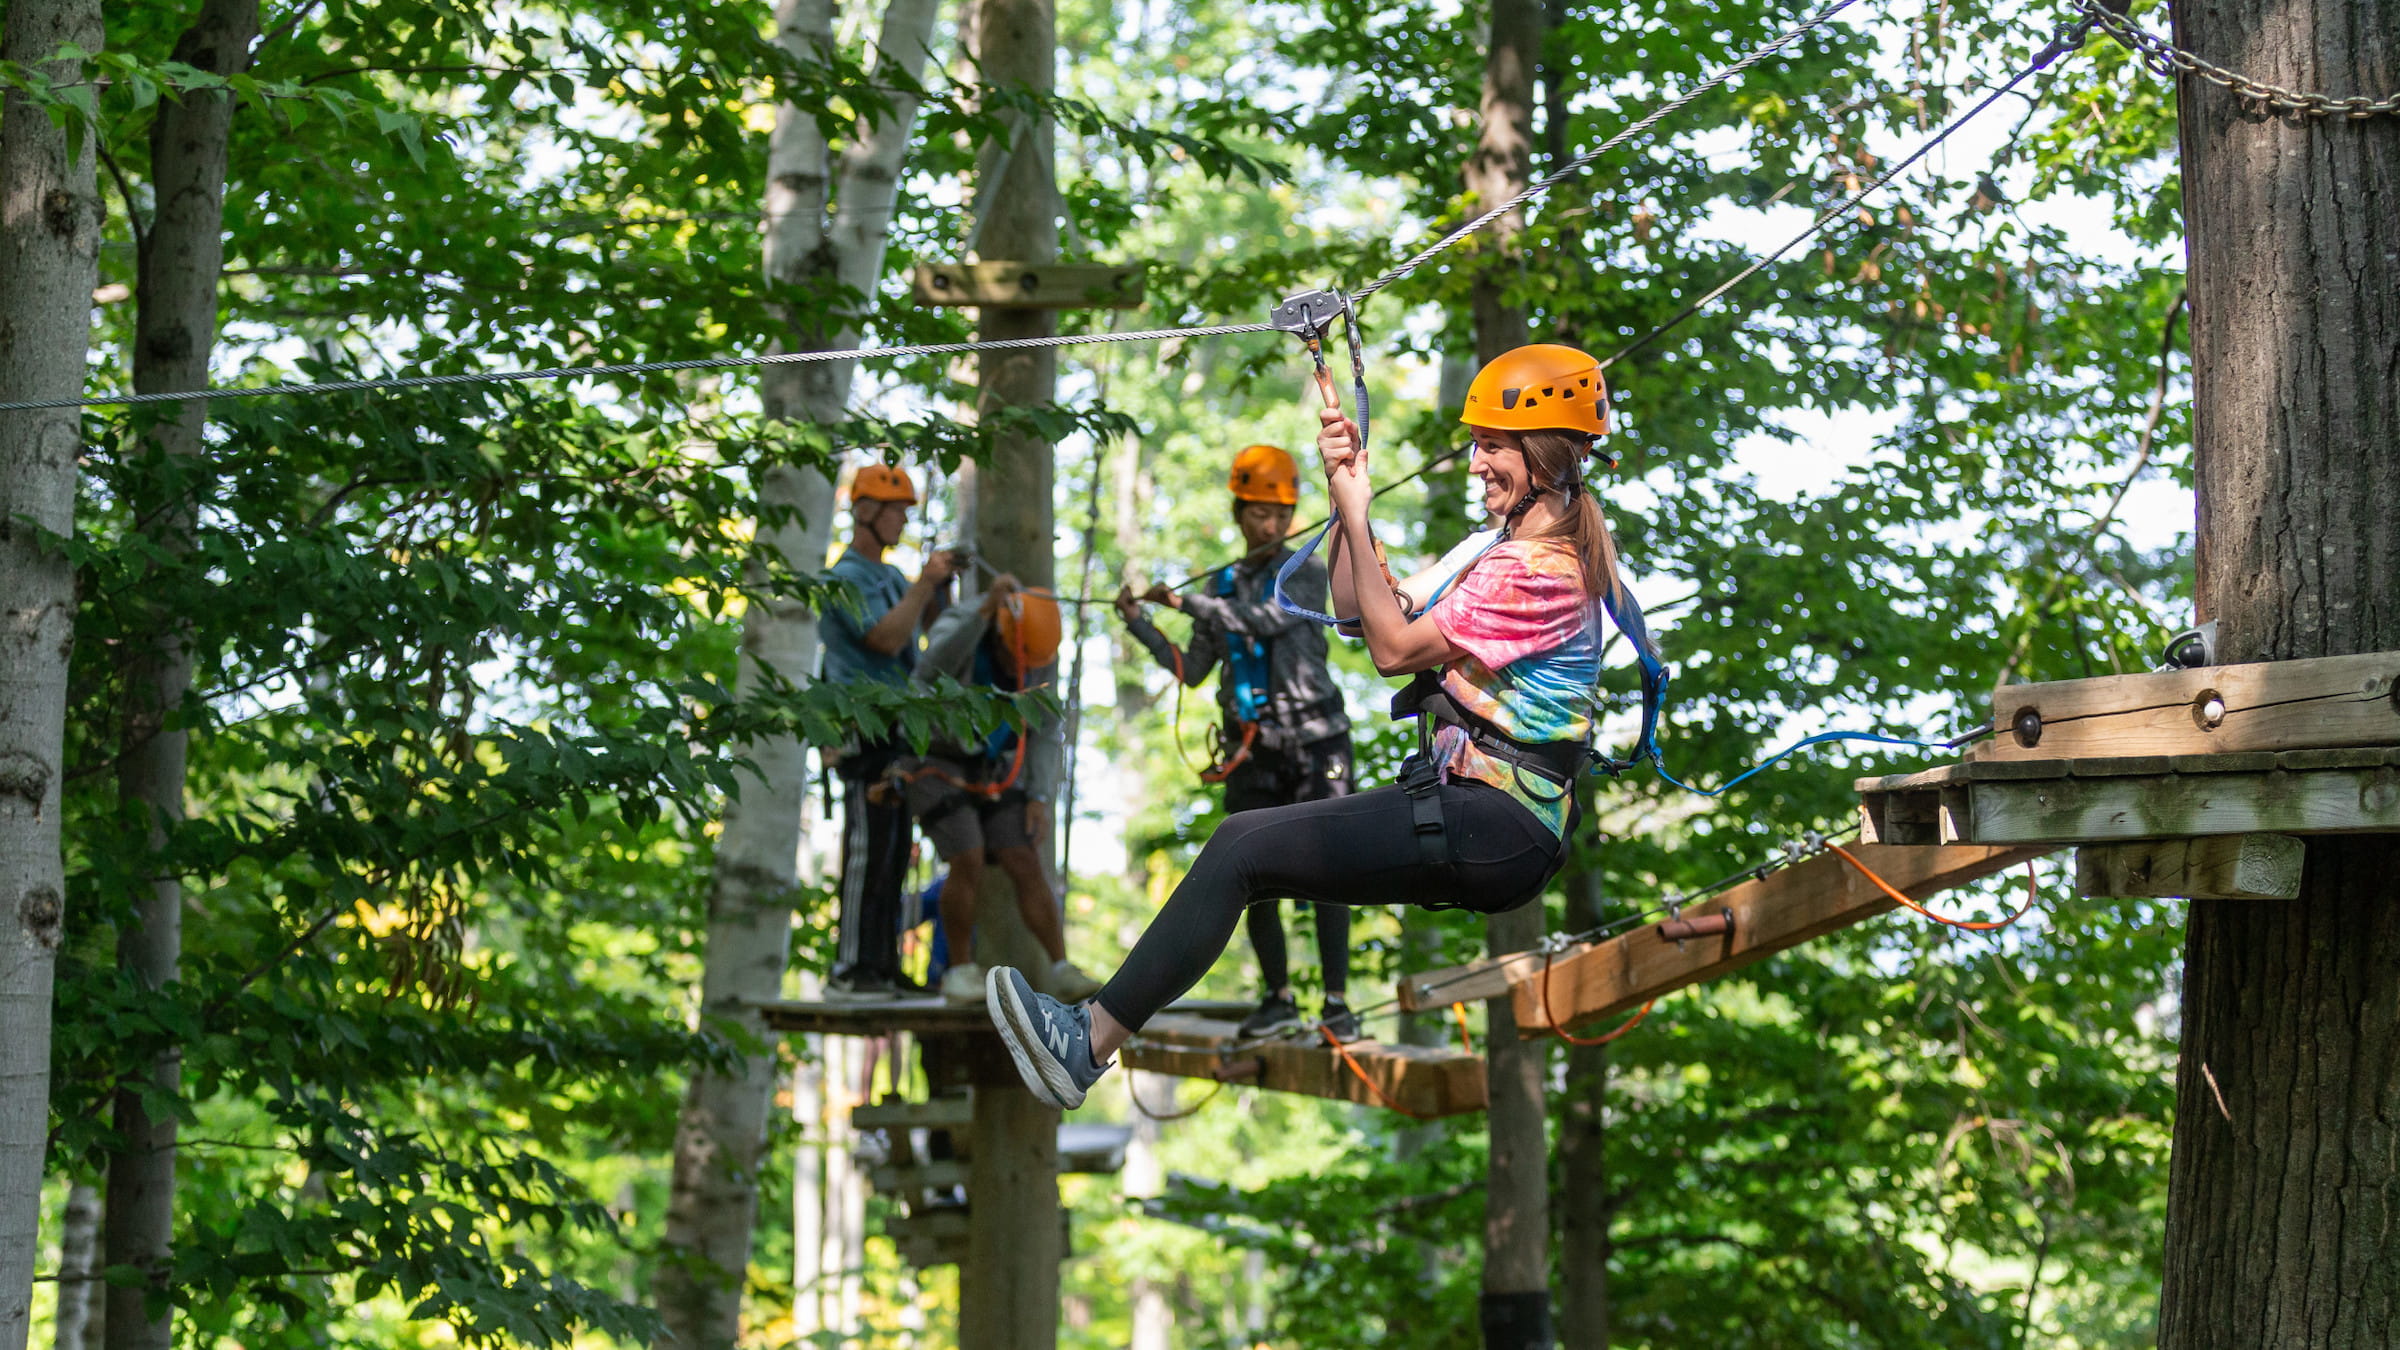 Group of people navigating the Timber Challenge High Ropes Course with a small zip line